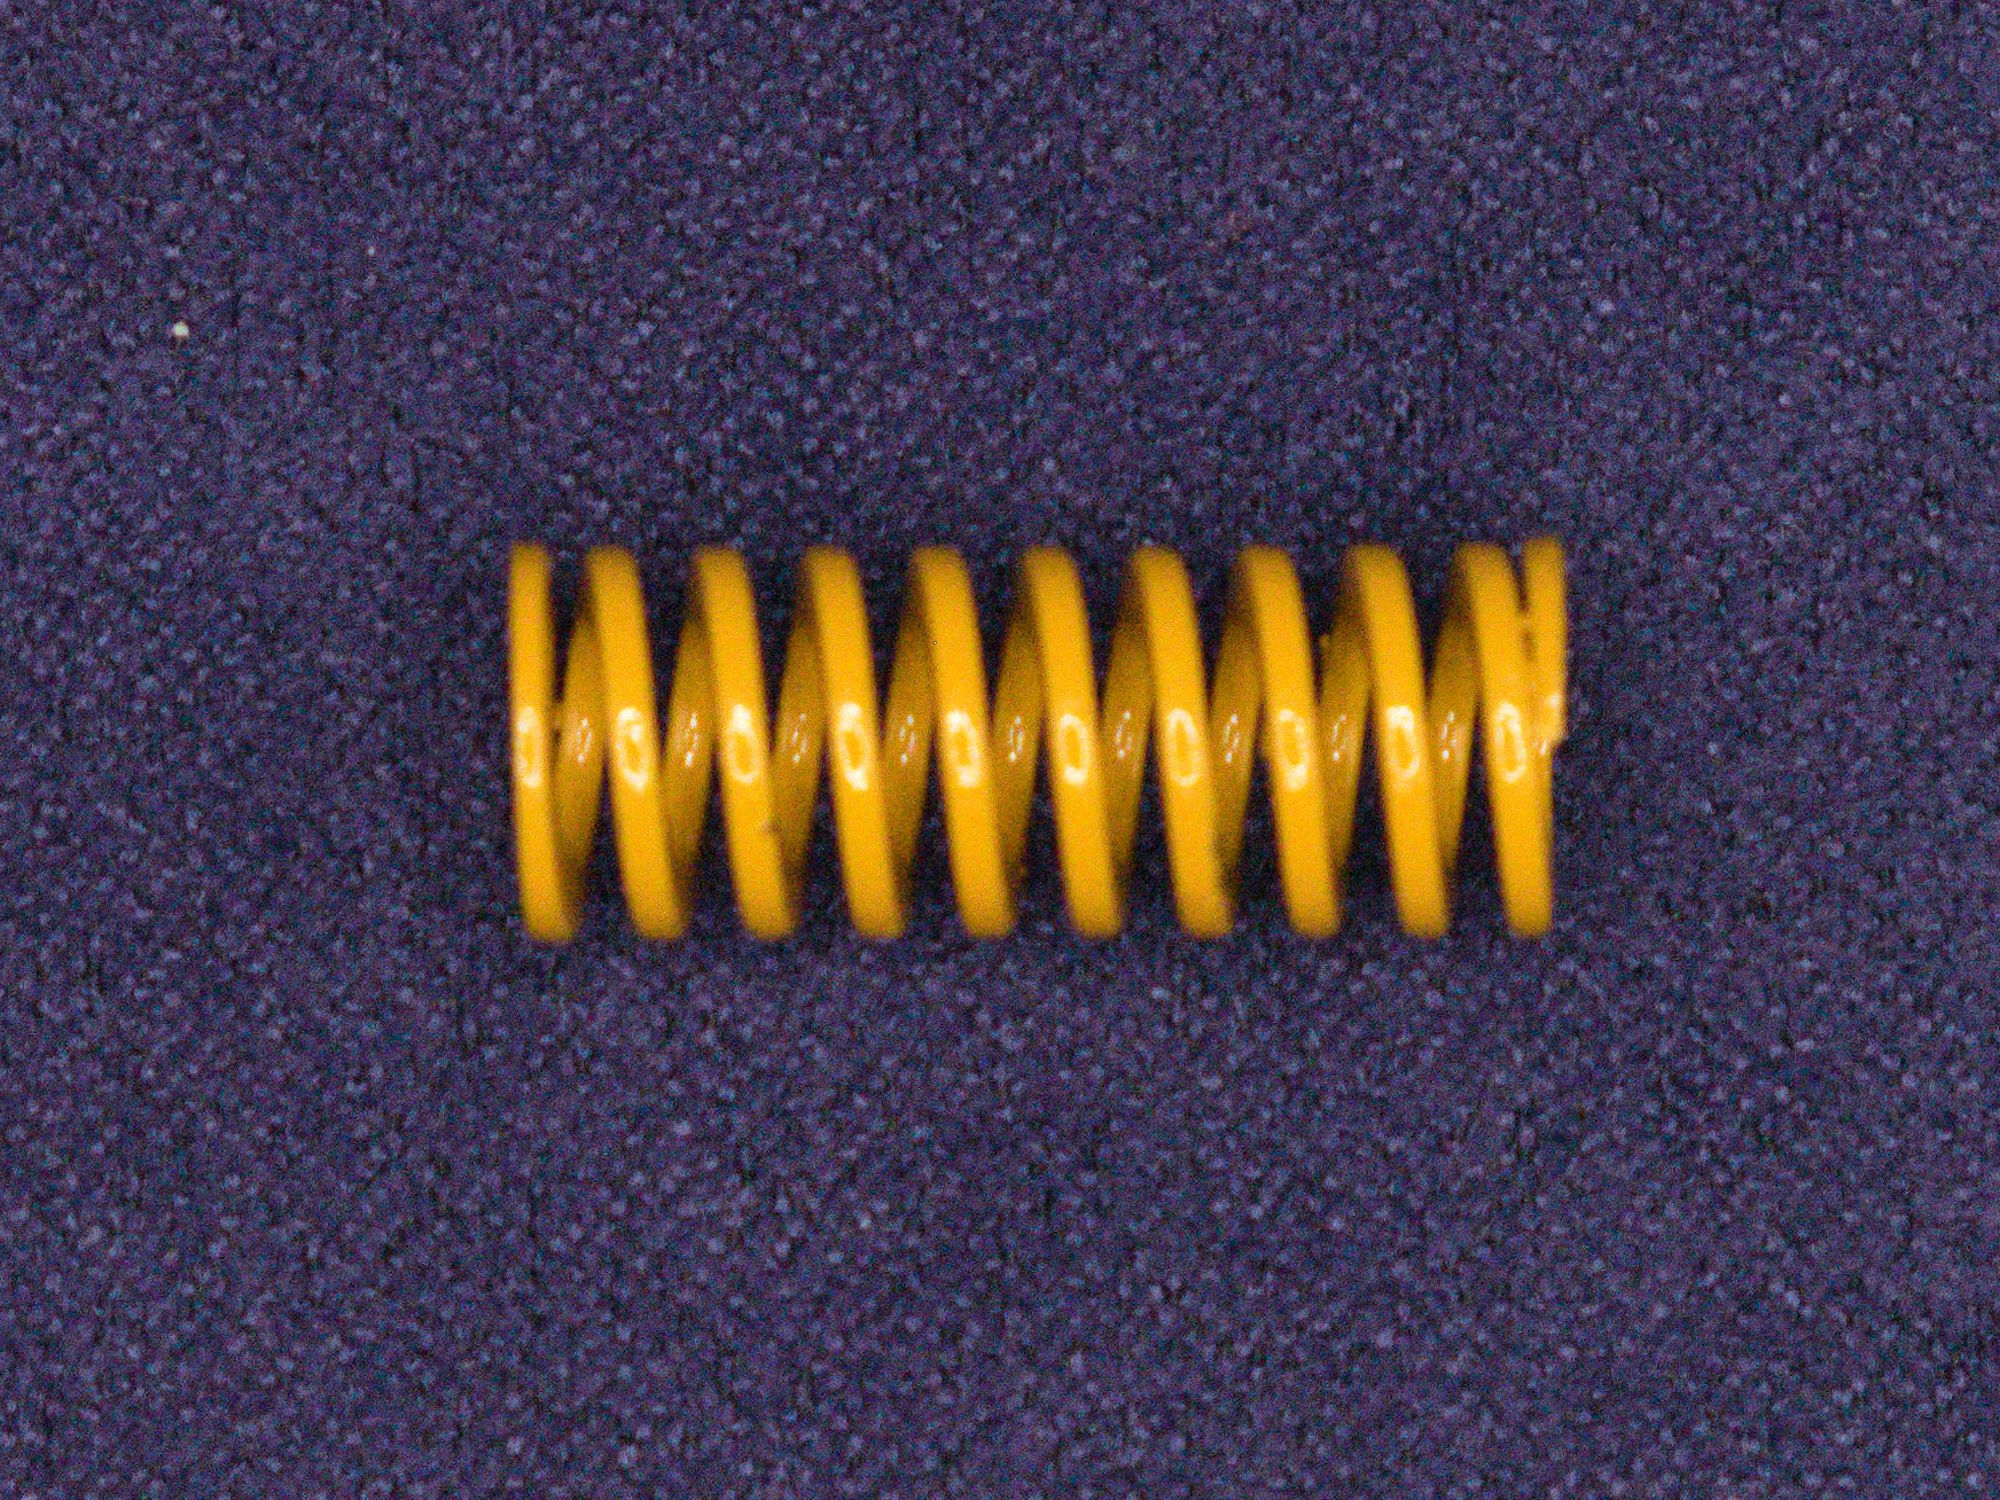 Bed Spring 20mm (yellow, light load)